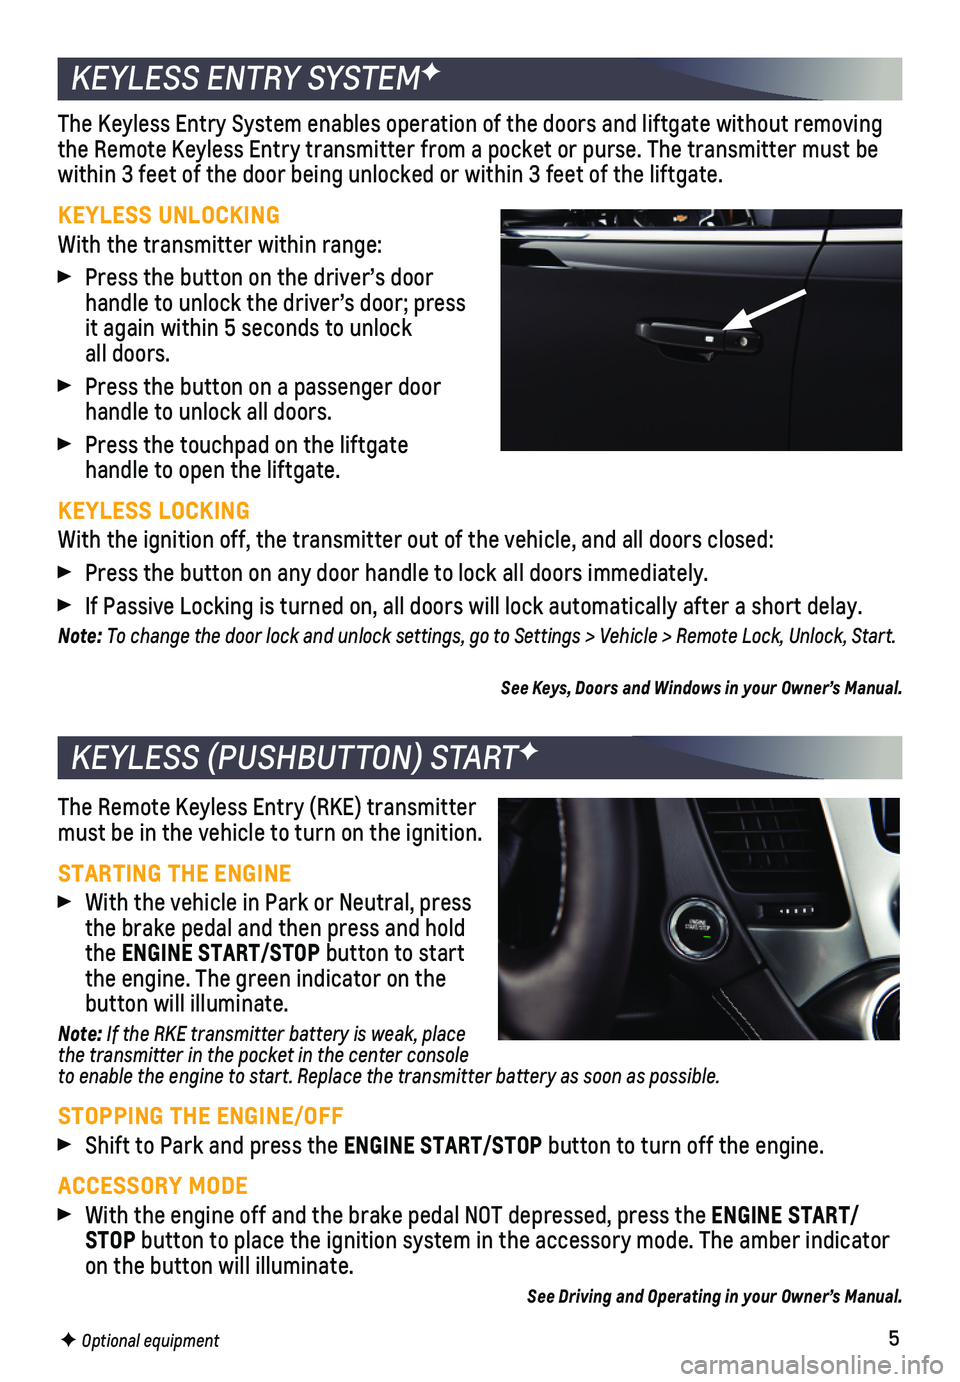 CHEVROLET SUBURBAN 2020  Get To Know Guide 5
The Remote Keyless Entry (RKE) transmitter must be in the vehicle to turn on the ignition.
STARTING THE ENGINE  
 With the vehicle in Park or Neutral, press the brake pedal and then press and hold t